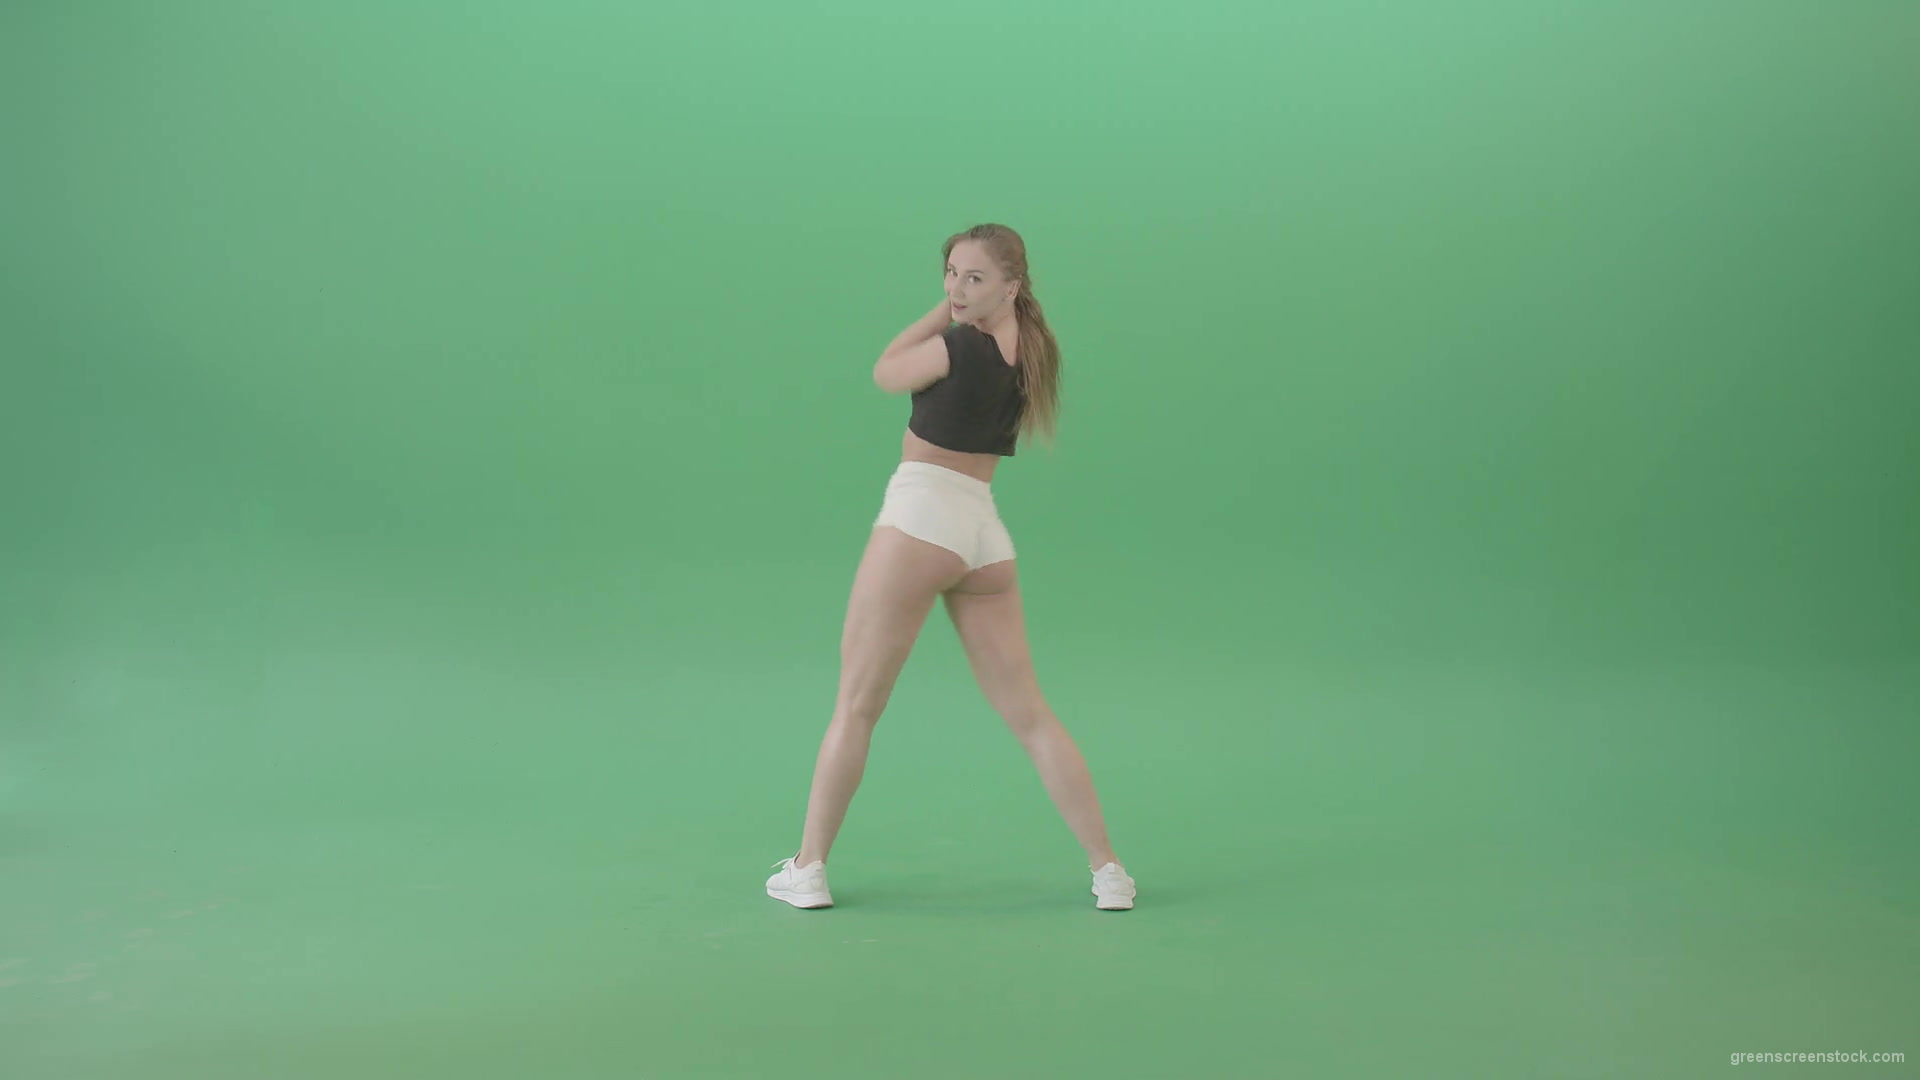 Beauty-girl-sрaking-ass-and-hips-dancing-Twerk-Afro-Dance-isolated-on-green-screen-4K-Video-Footage-1920_009 Green Screen Stock